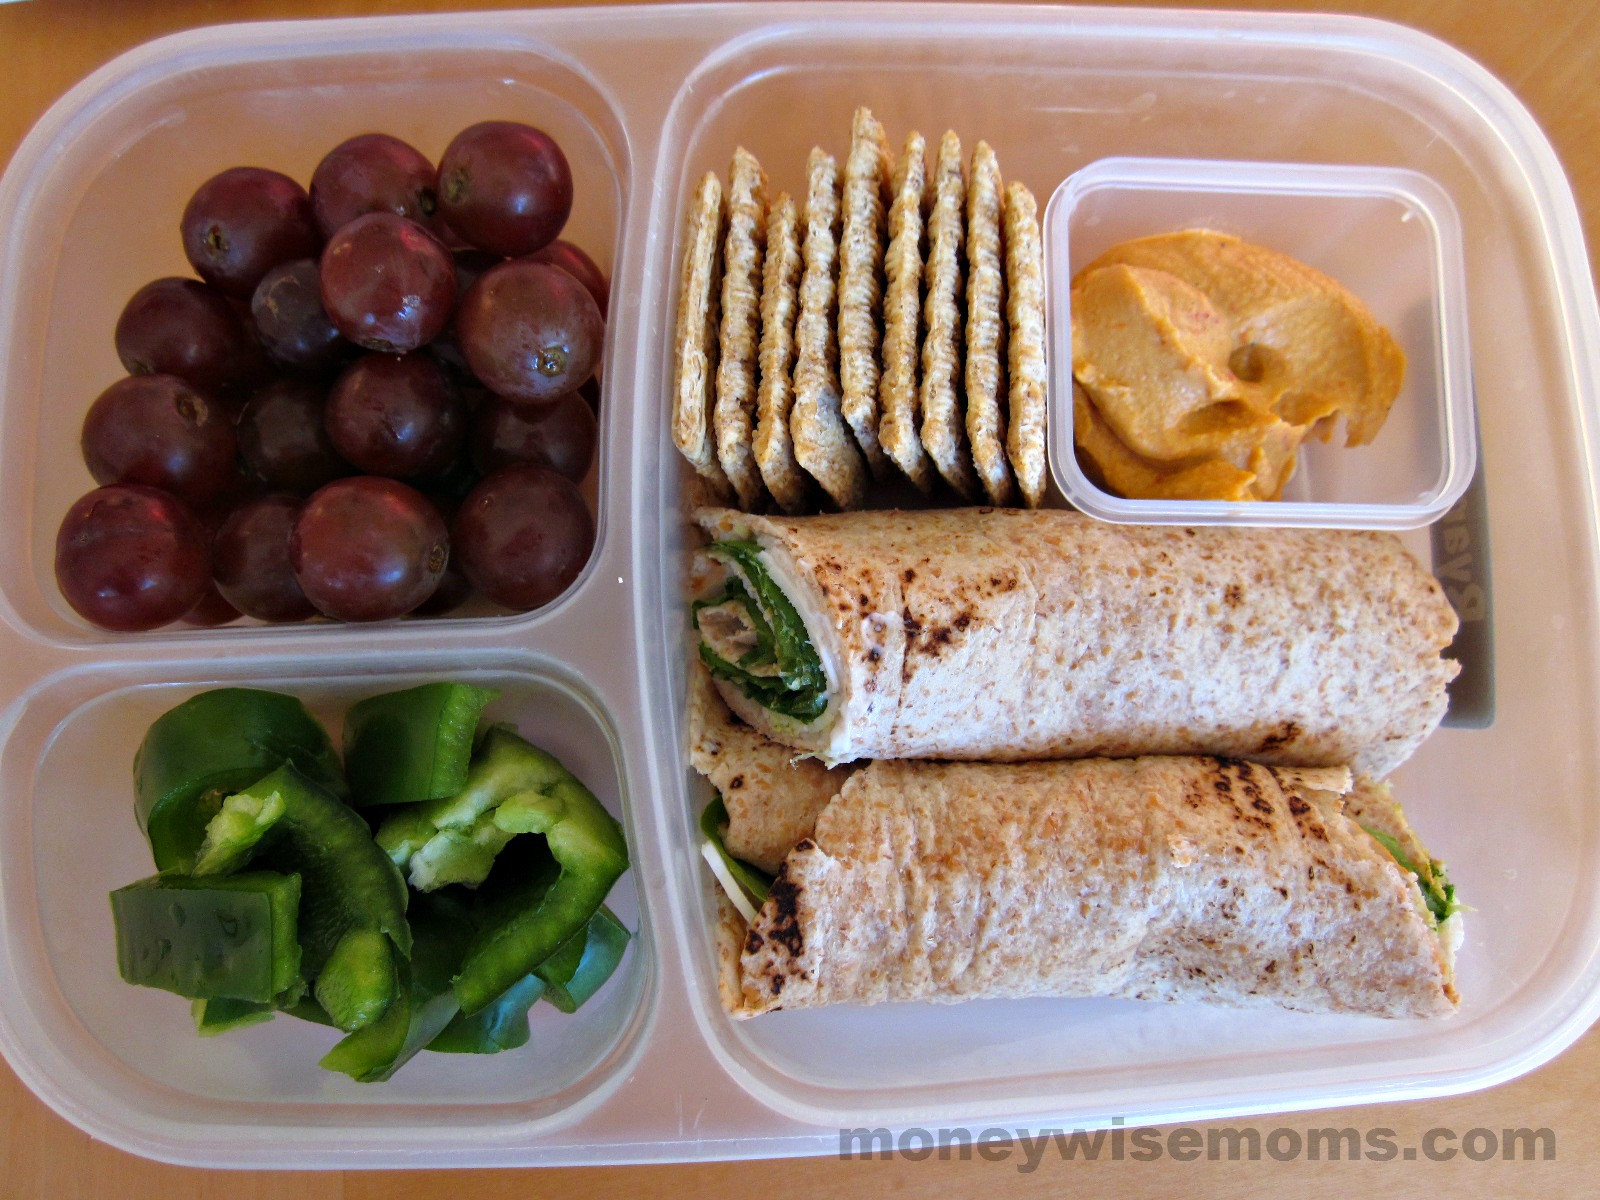 Healthy High School Lunches
 Healthy School Lunches My Kids Faves Moneywise Moms